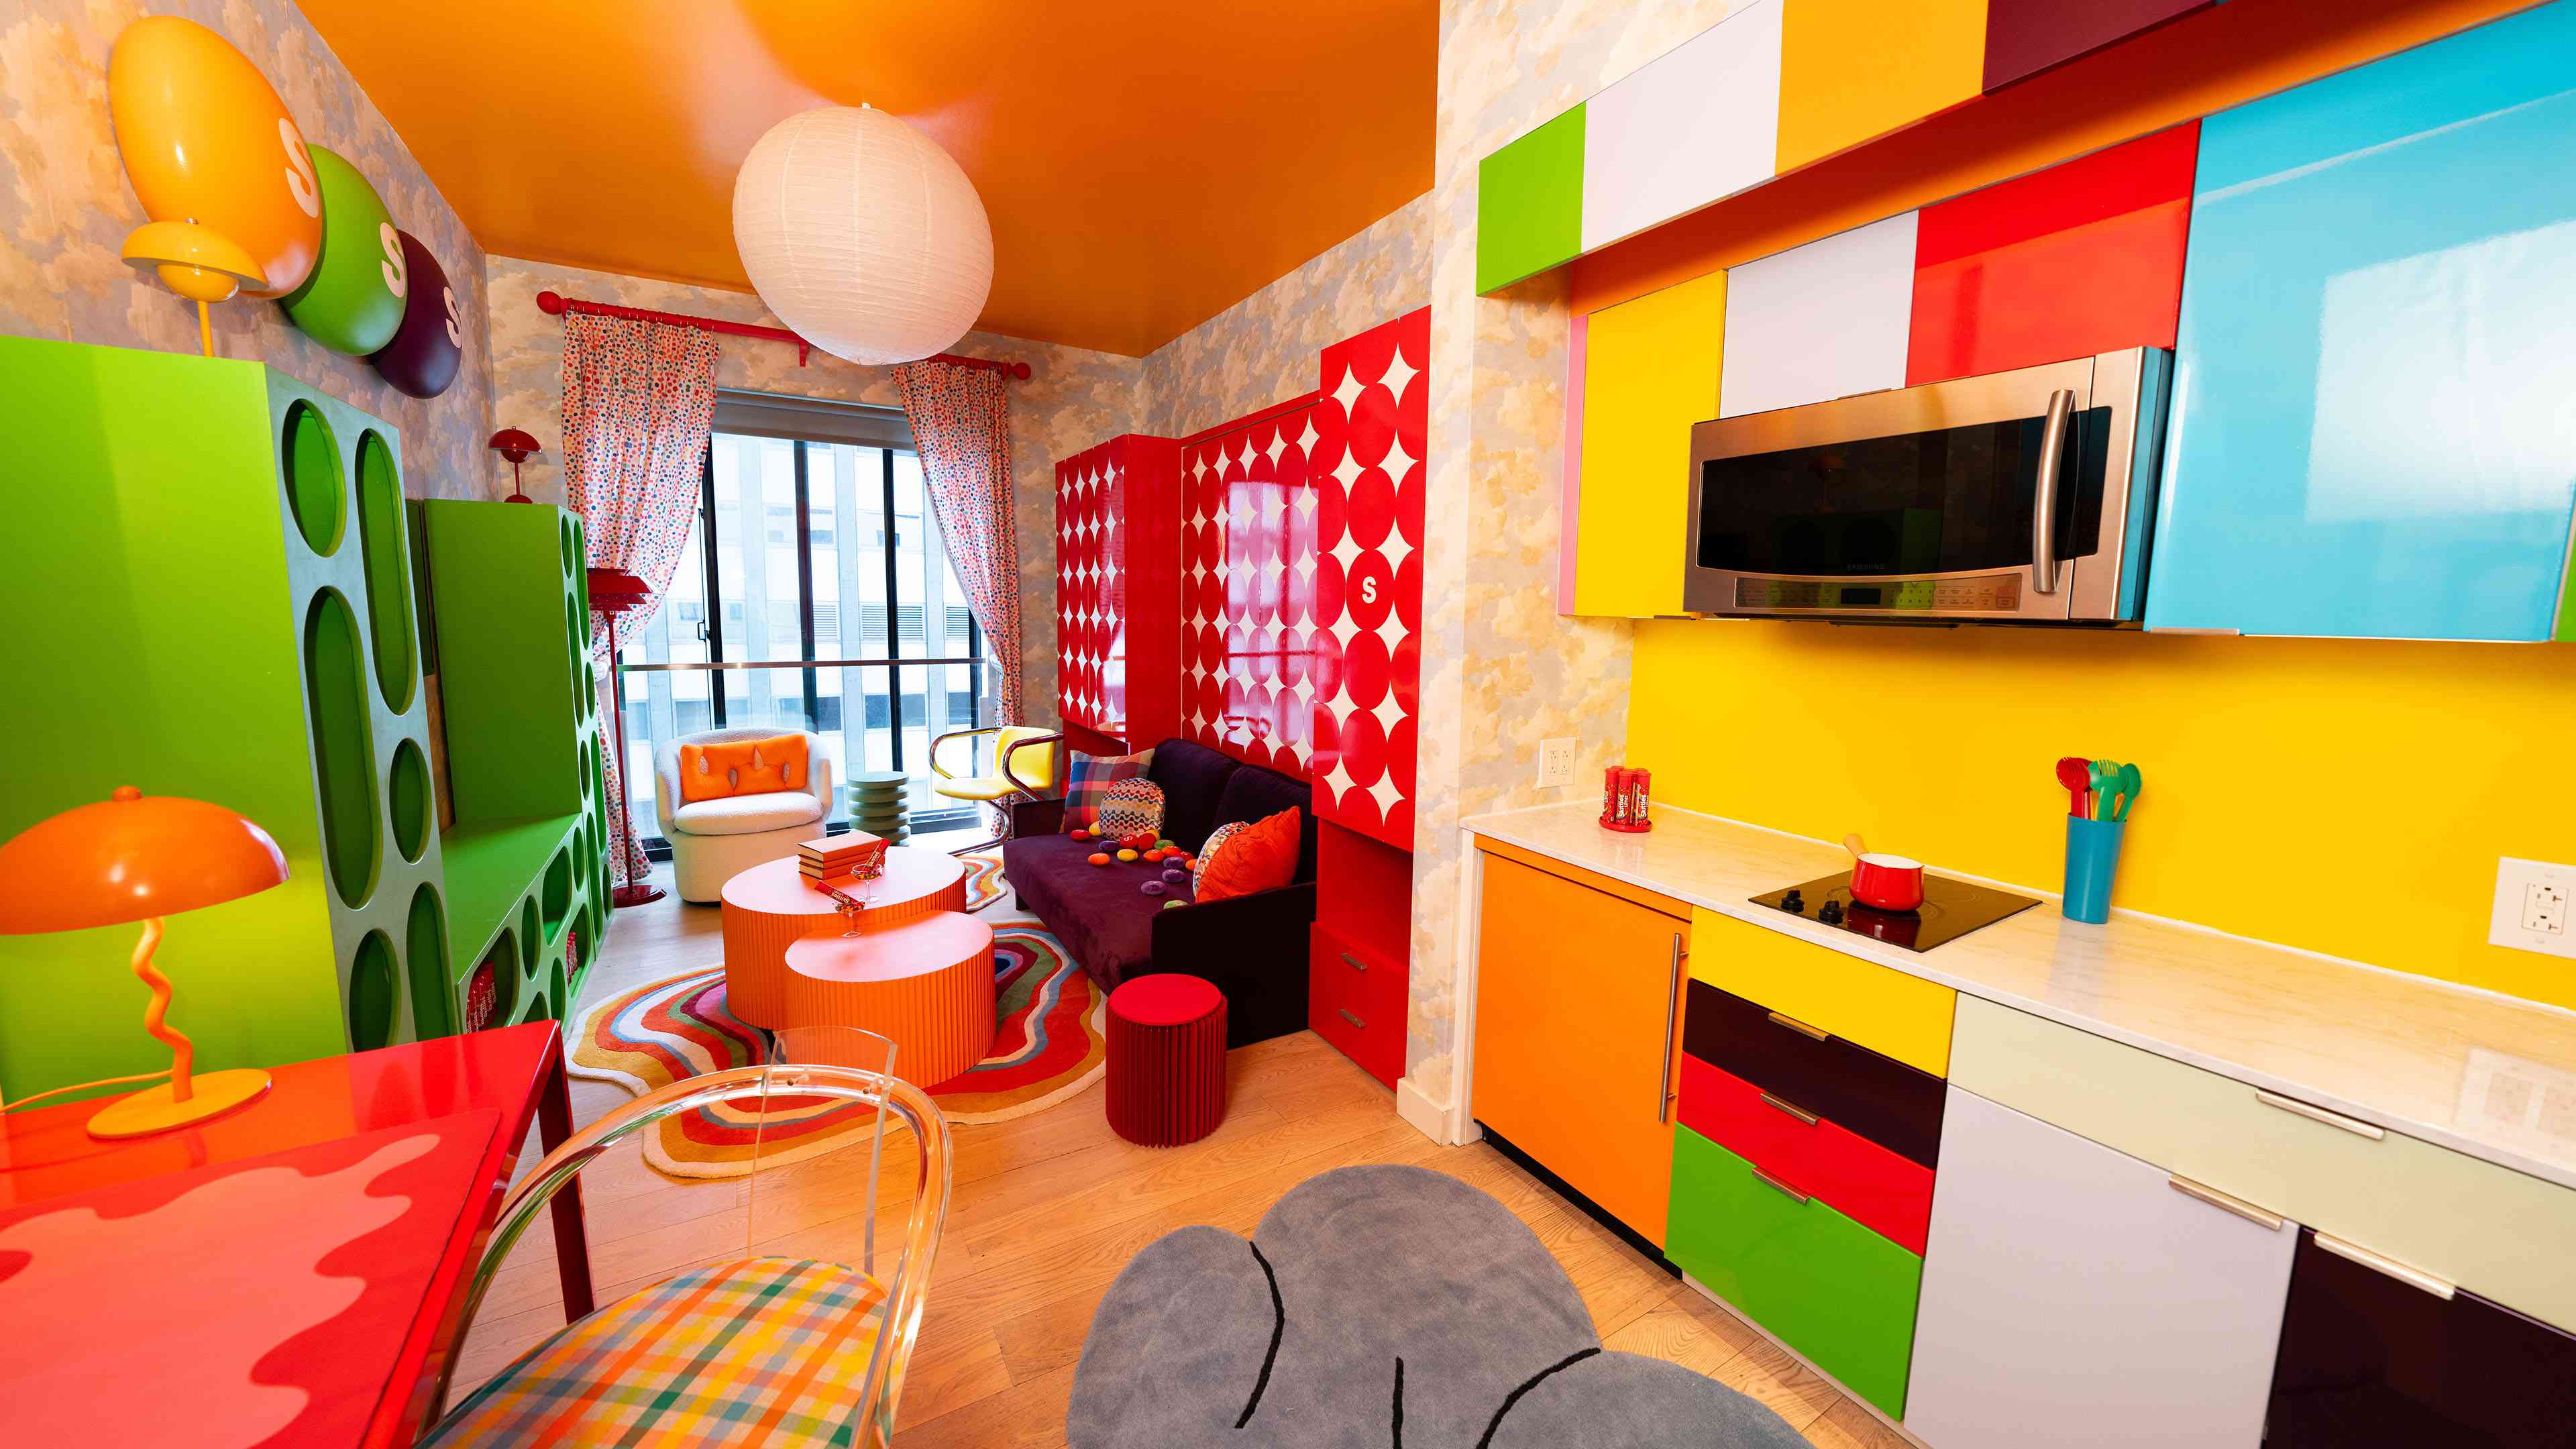 Skittles Is Giving Fans the Chance to Live in This Colorful Micro-Apartment Rent-Free for a Year